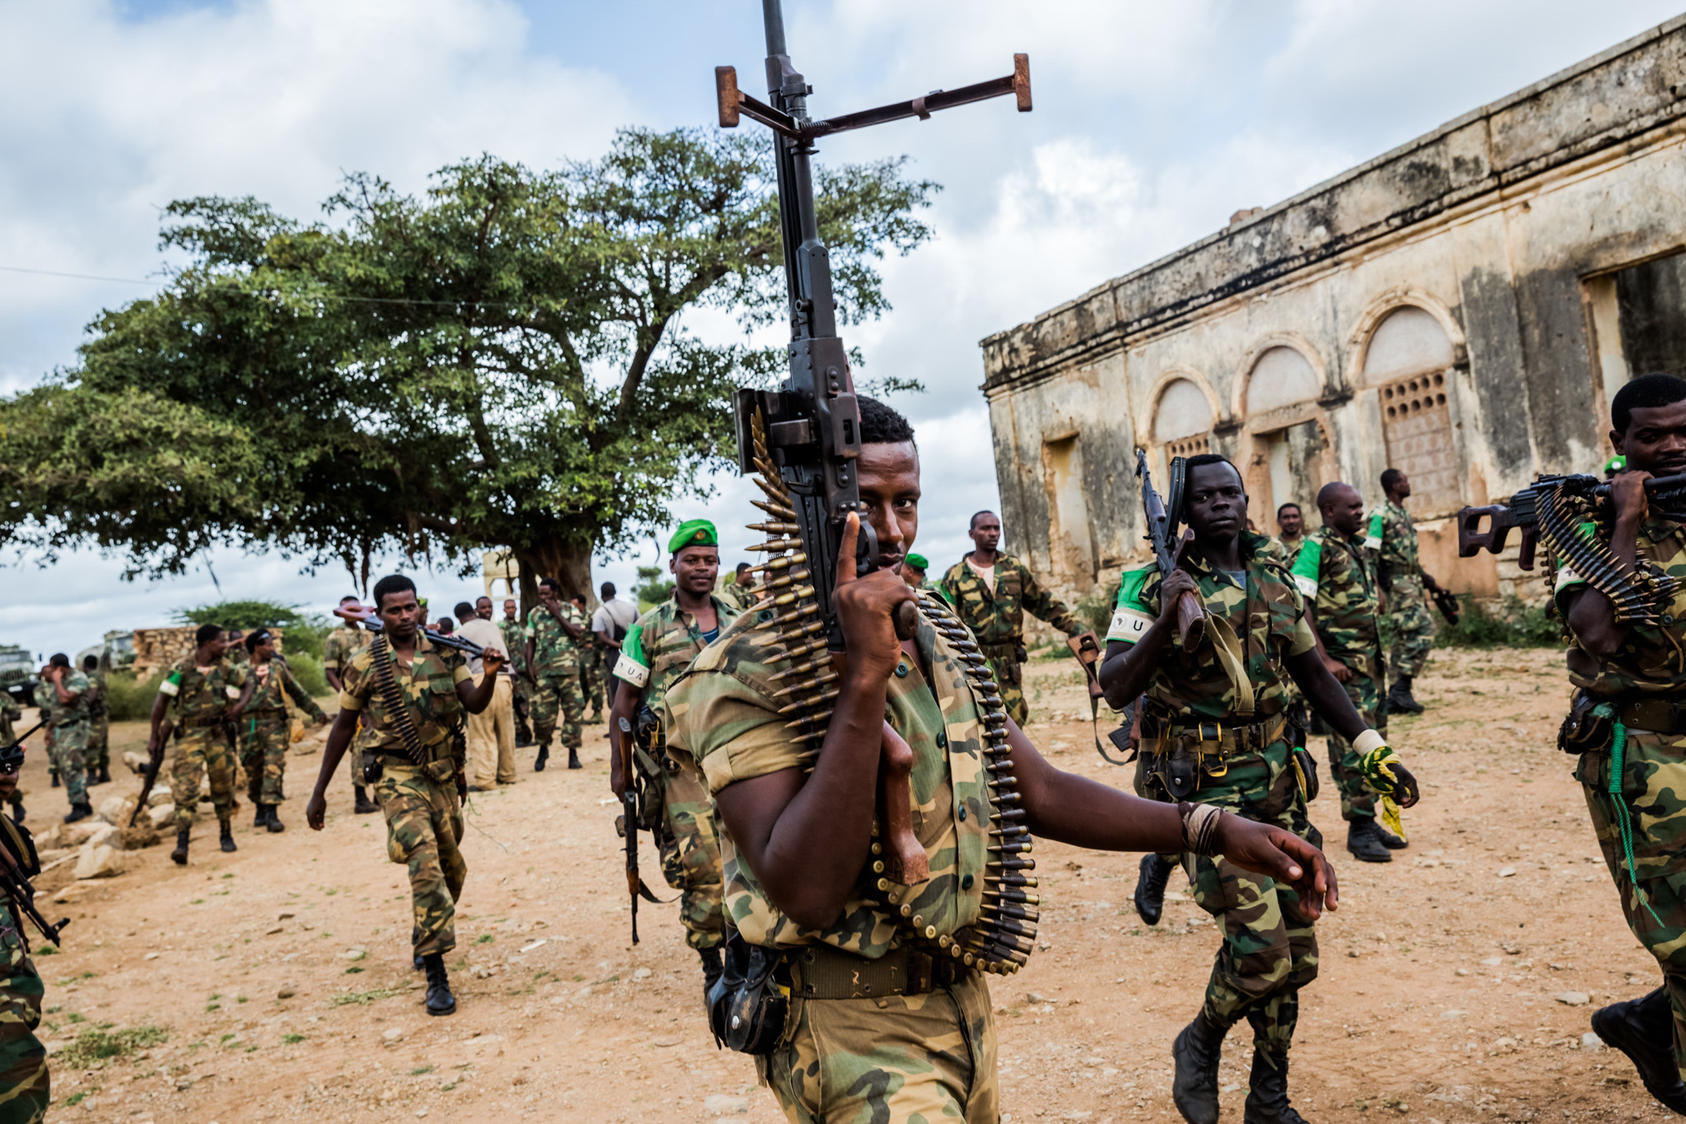 Ethiopian soldiers, part of the African Union peacekeeping mission in Somalia, escort a convoy of trucks carrying food aid in Baidoa, Somalia, June 10, 2014. In a recent attack in Somalia in early 2016, al-Shabab militants massacred as many as 100 Kenyan soldiers in a peacekeeping mission, seizing their equipment. The attack could mark a turning point for the Shabab, one of Africa’s most violent militant groups. (Daniel Berehulak/The New York Times)